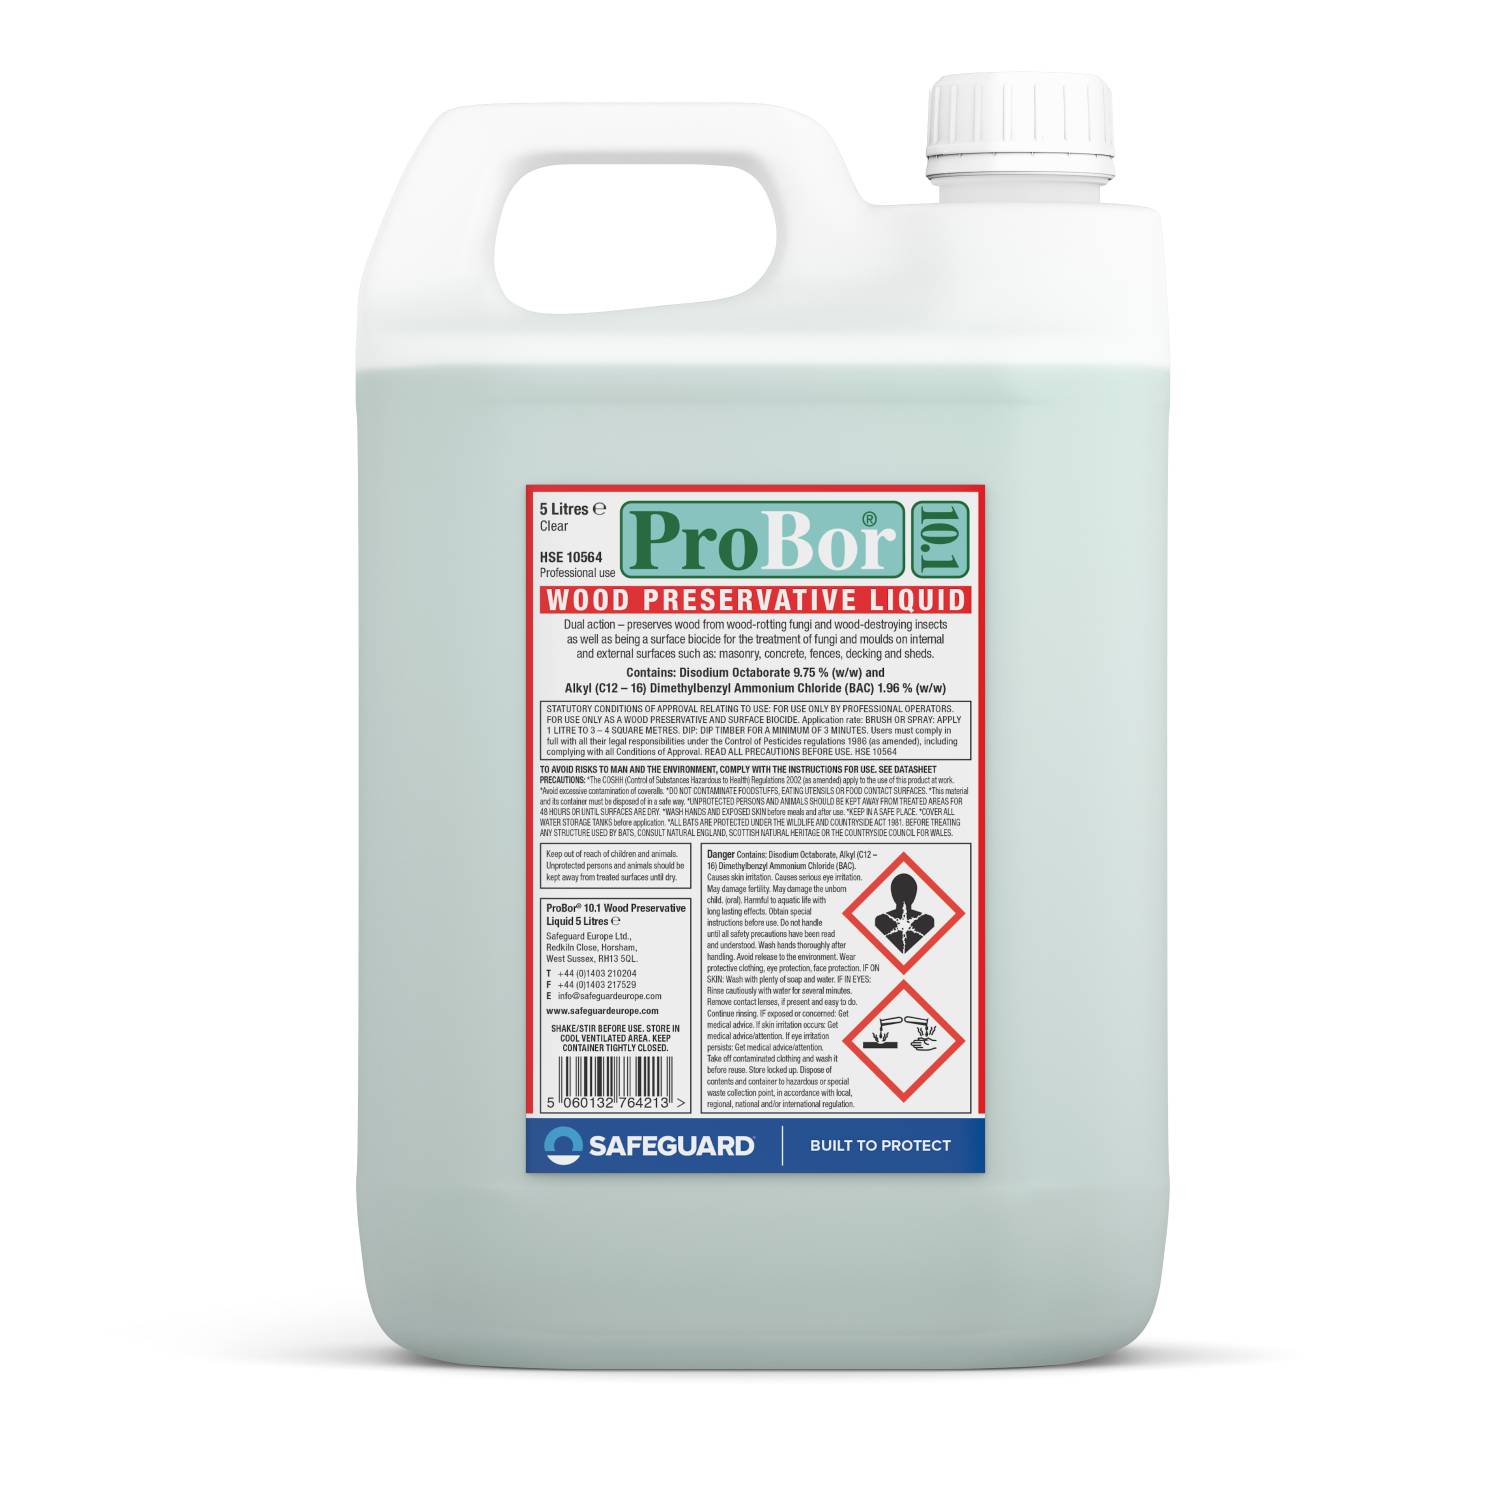 ProBor 10.1 - High Strength Dual Purpose Wood Preservative Liquid, for Woodworm, Dry and Wet Rot Treatment, Low Odour Formulation